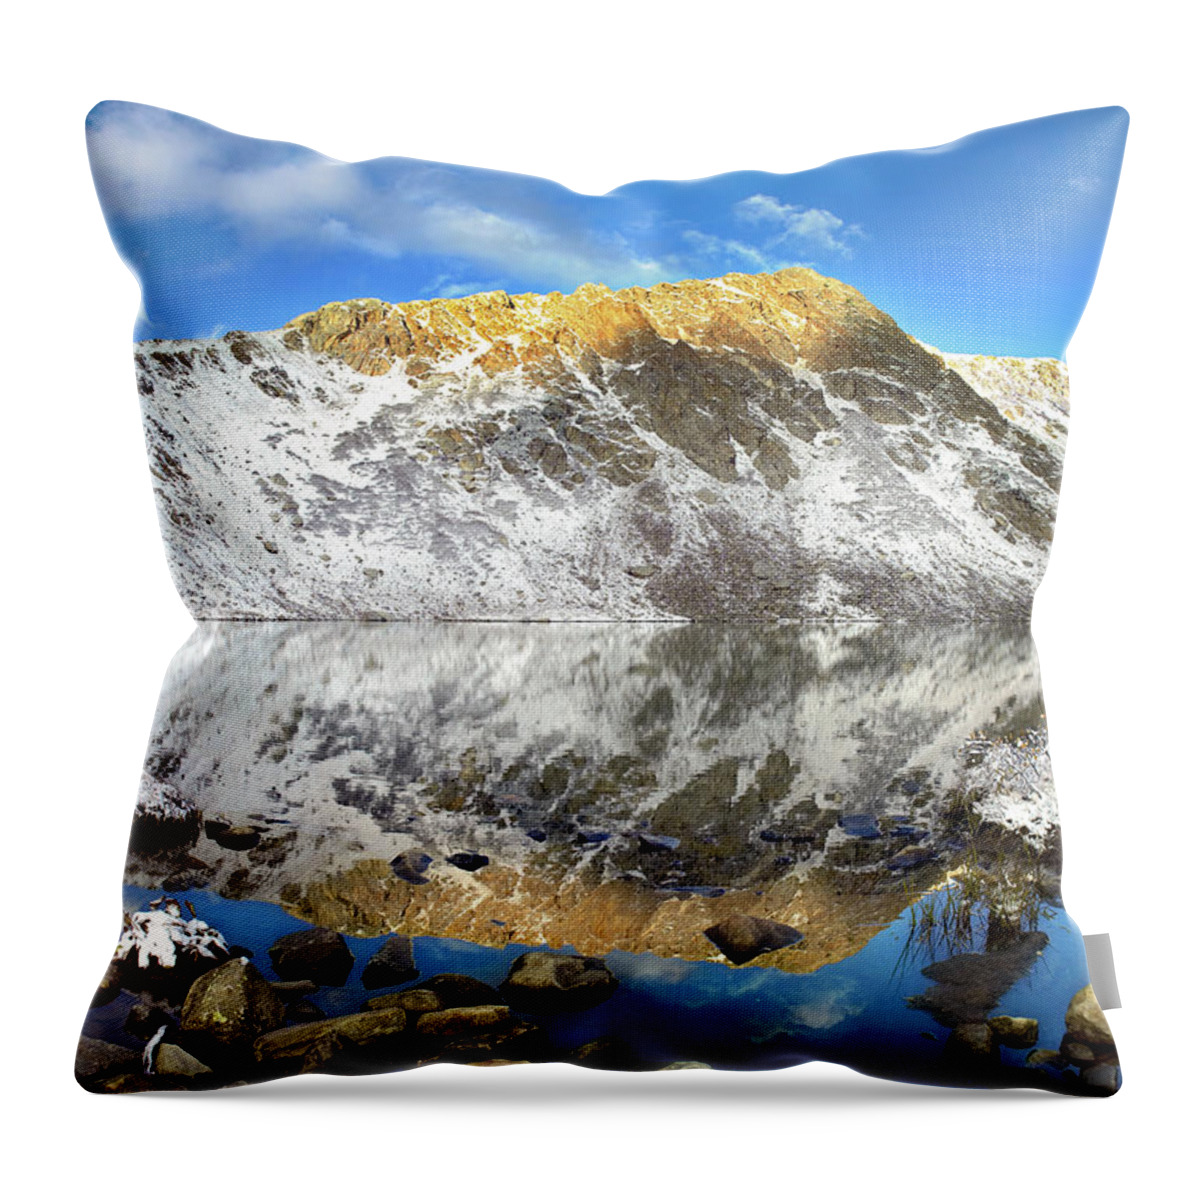 00175170 Throw Pillow featuring the photograph Geissler Mountain and Linkins Lake by Tim Fitzharris